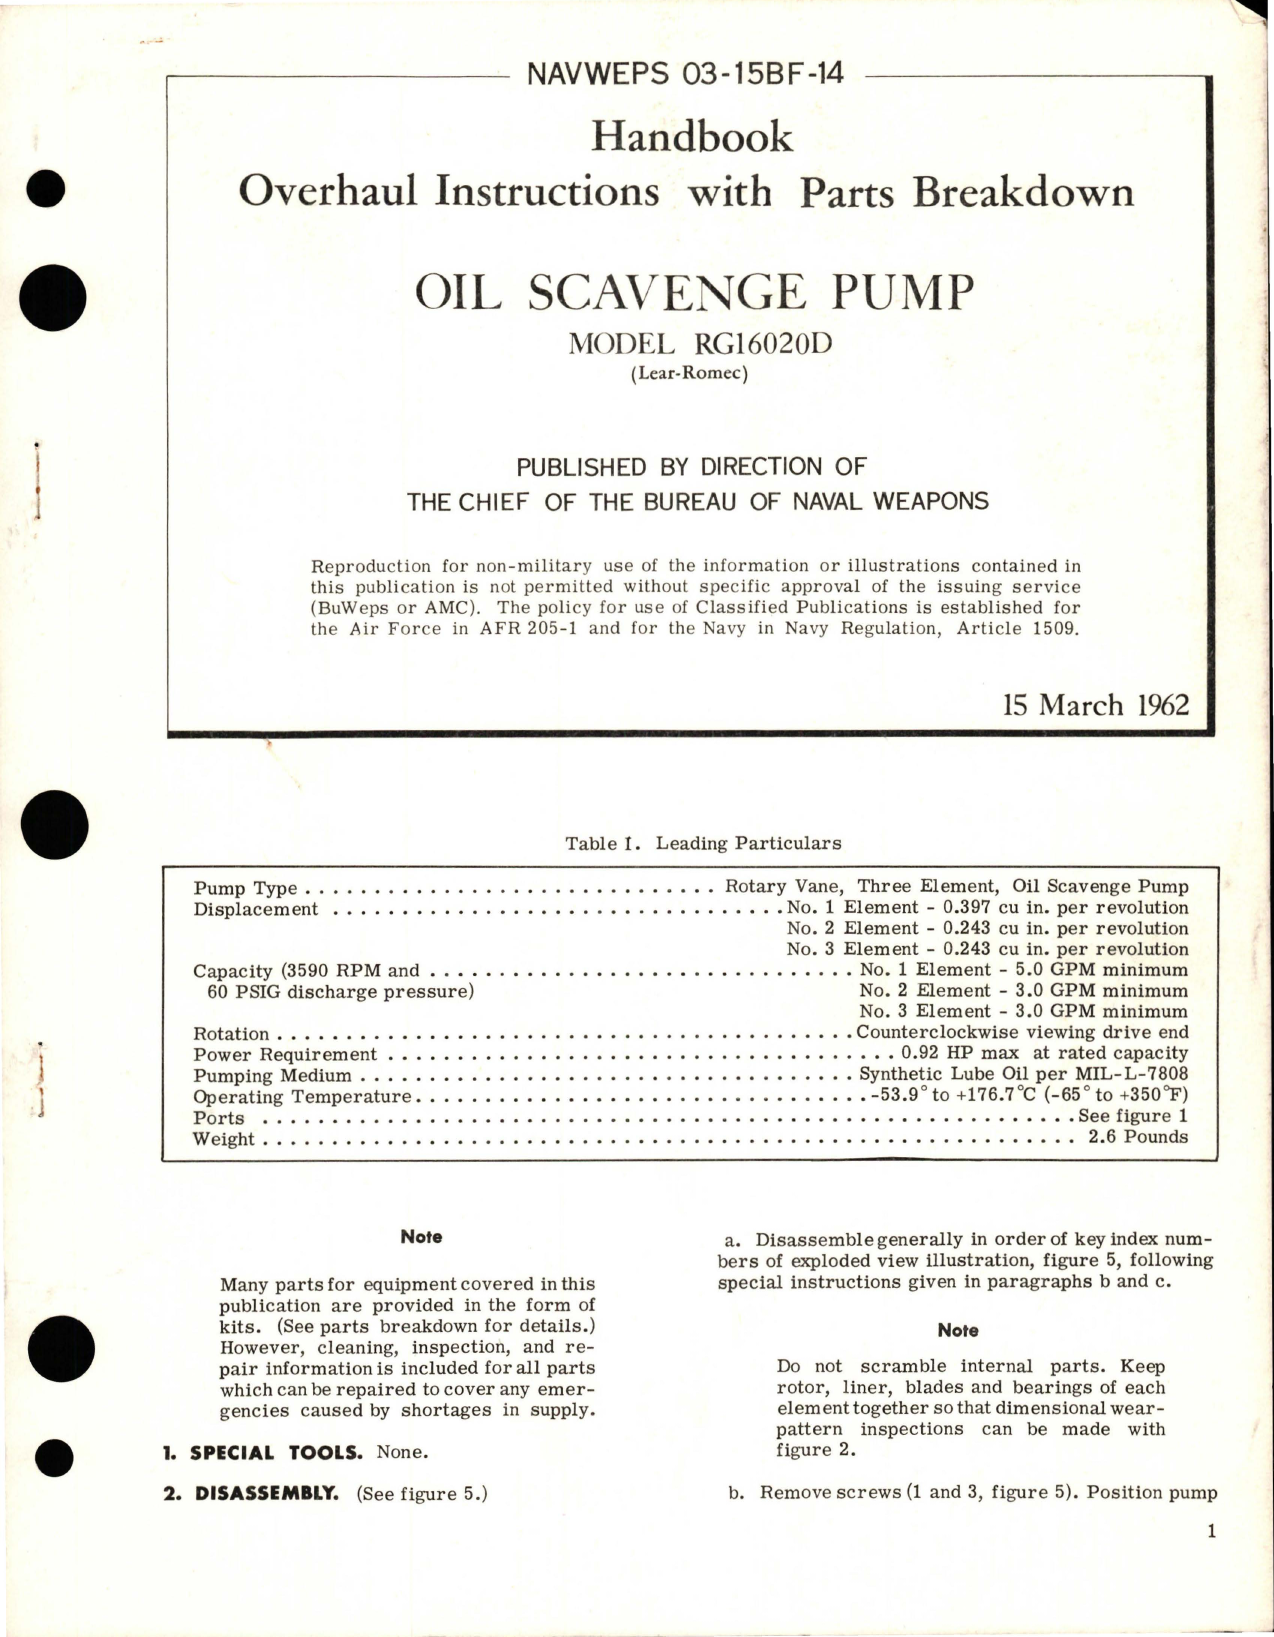 Sample page 1 from AirCorps Library document: Overhaul Instructions with Parts for Oil Scavenge Pump - Model RG16020D